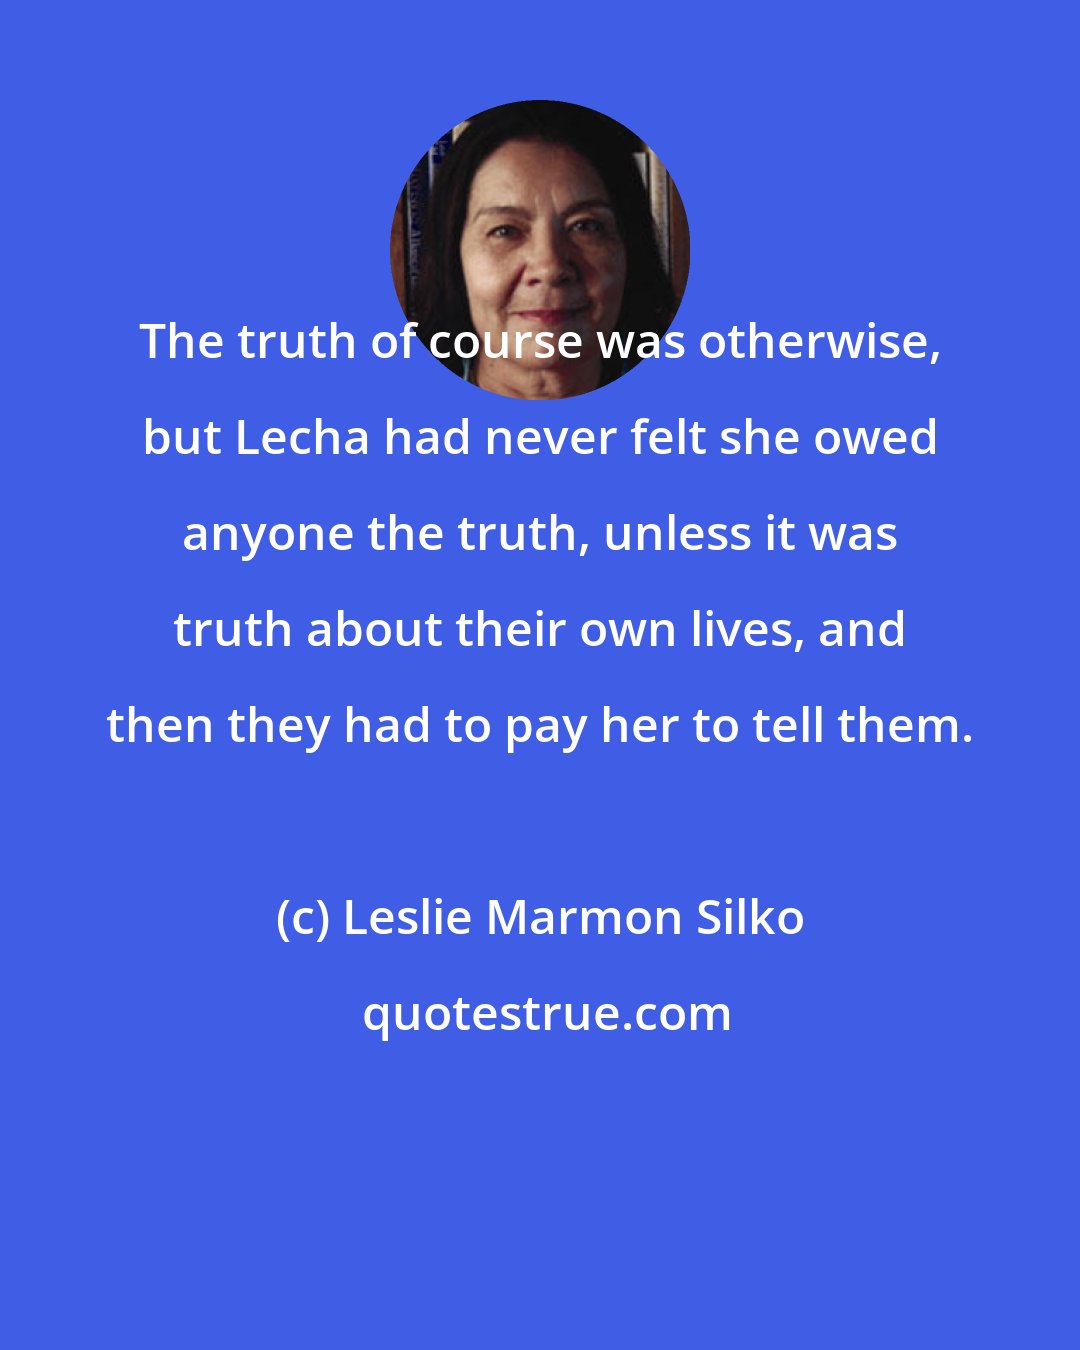 Leslie Marmon Silko: The truth of course was otherwise, but Lecha had never felt she owed anyone the truth, unless it was truth about their own lives, and then they had to pay her to tell them.